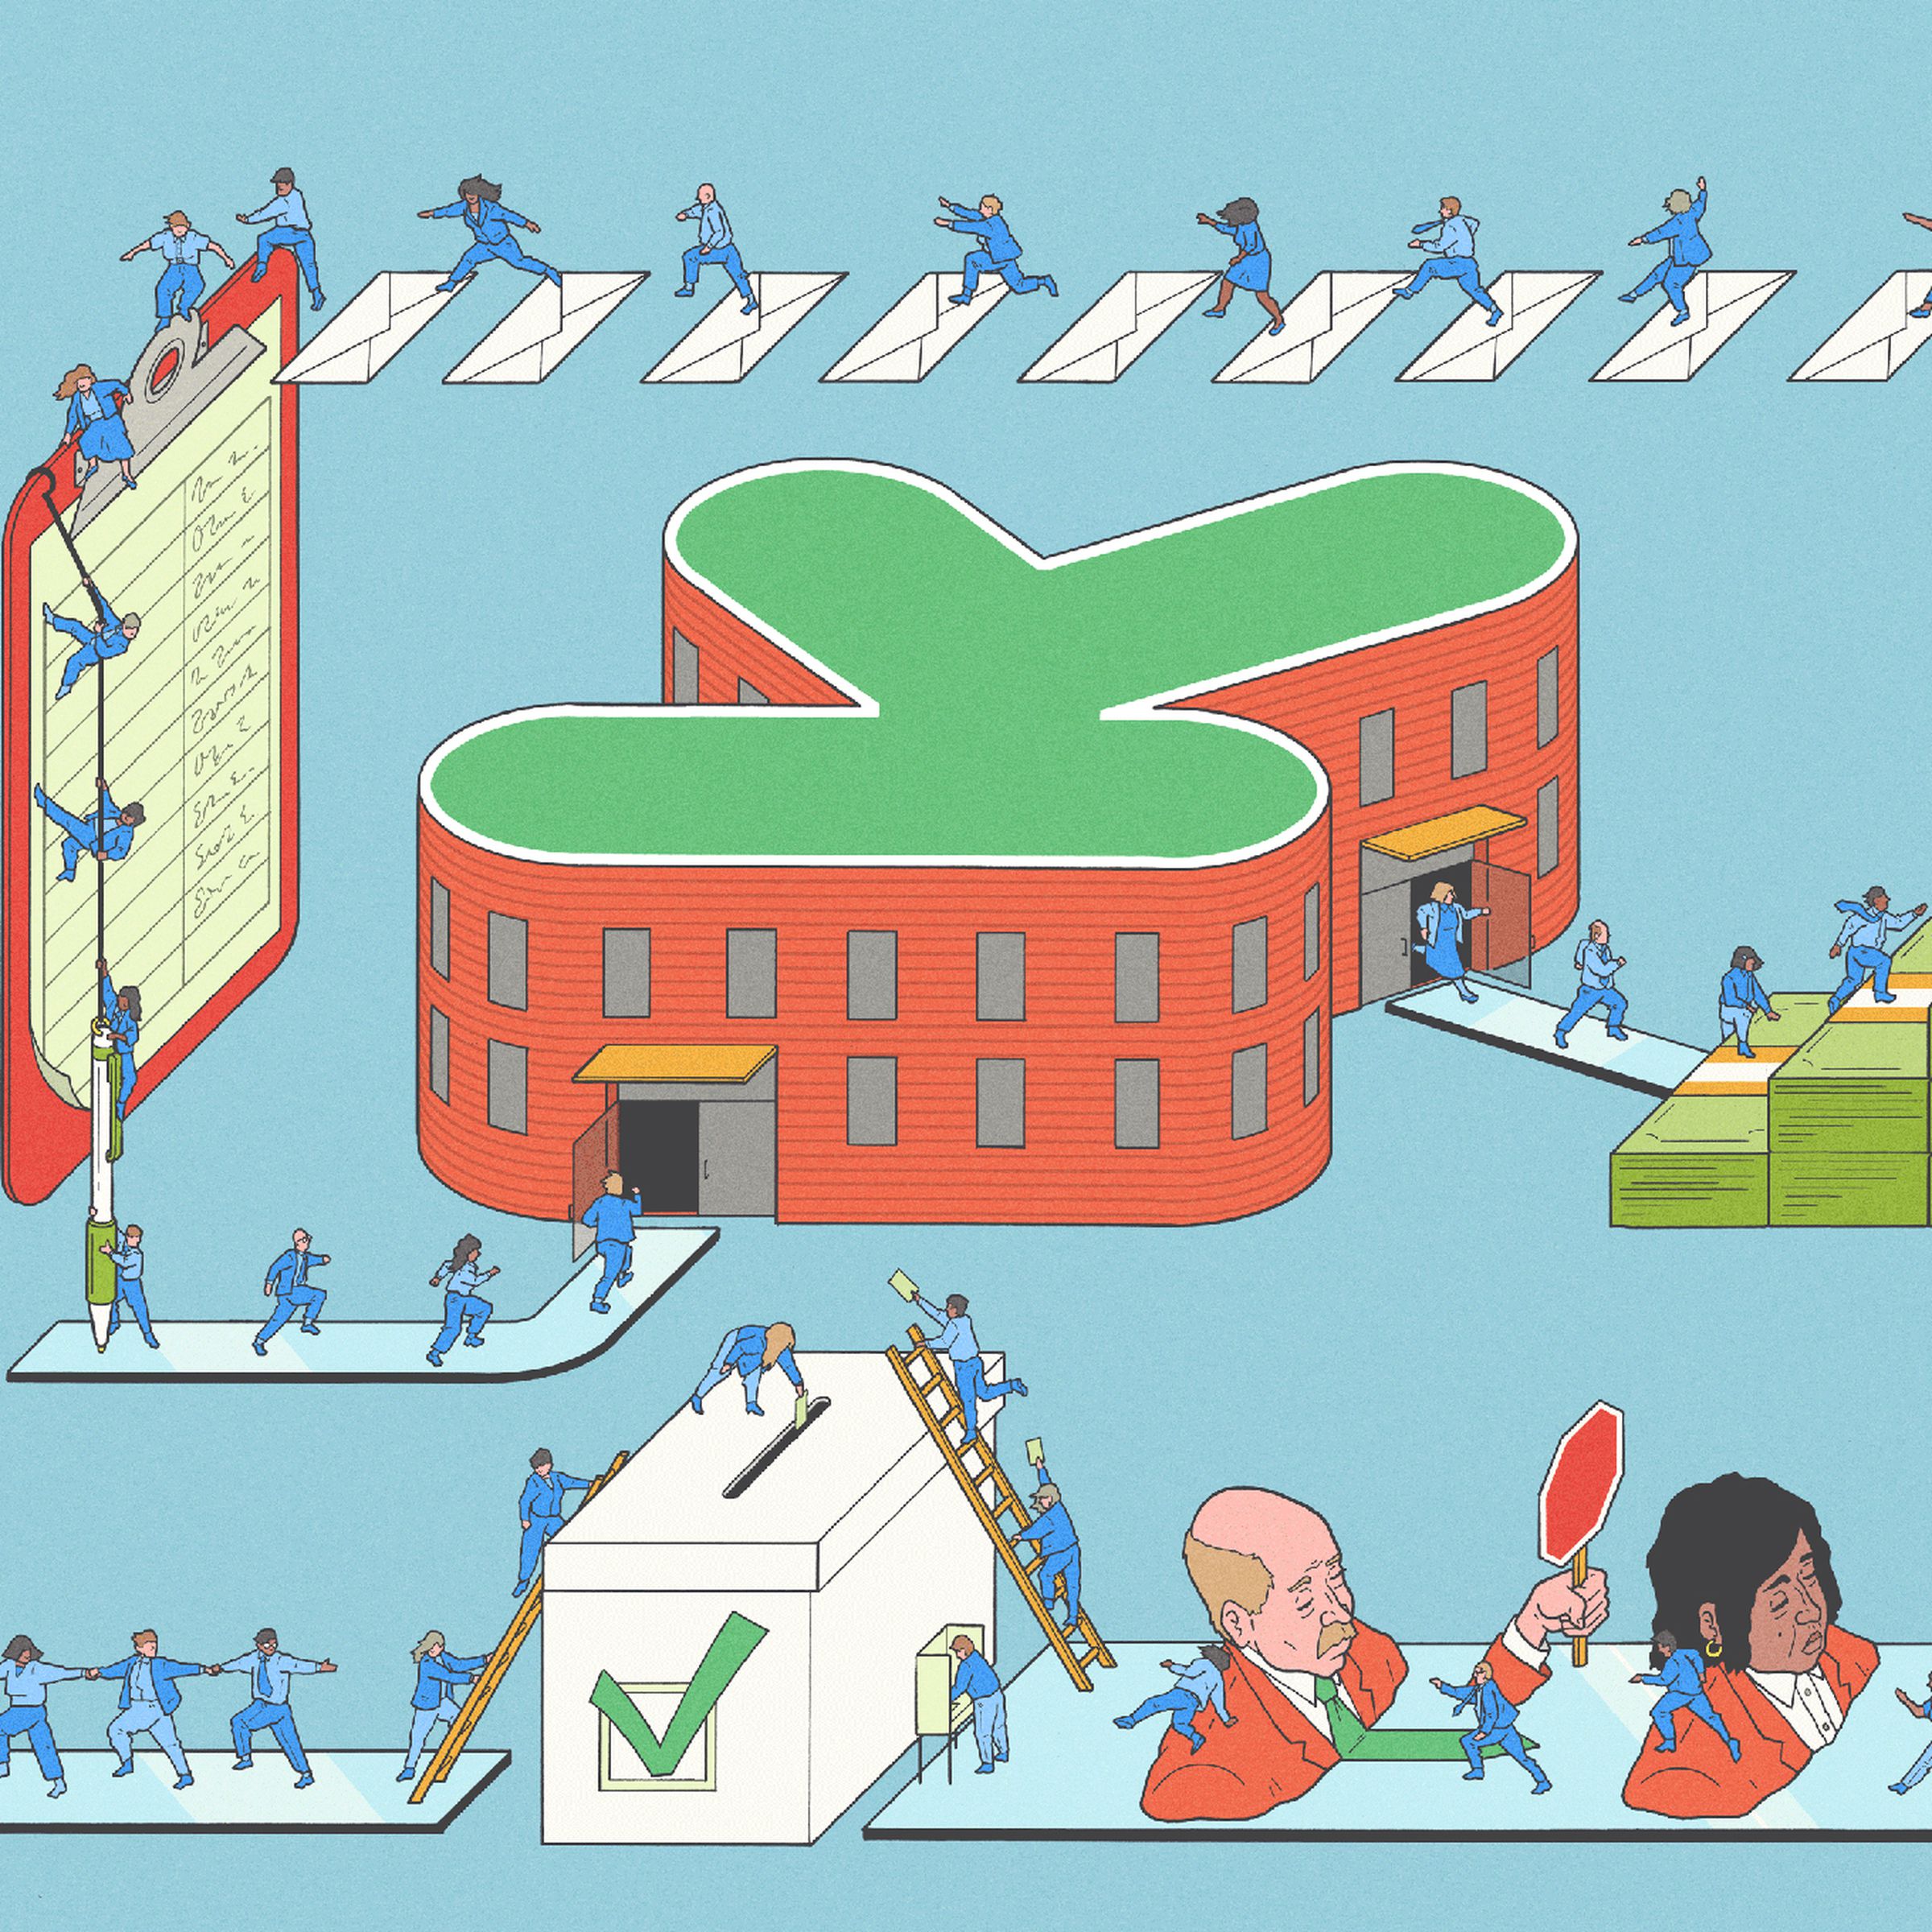 An illustration depicting a surreal workplace obstacle course with workers navigating various hurdles in the form of office managers and paperwork on their way to a box to cast their vote  